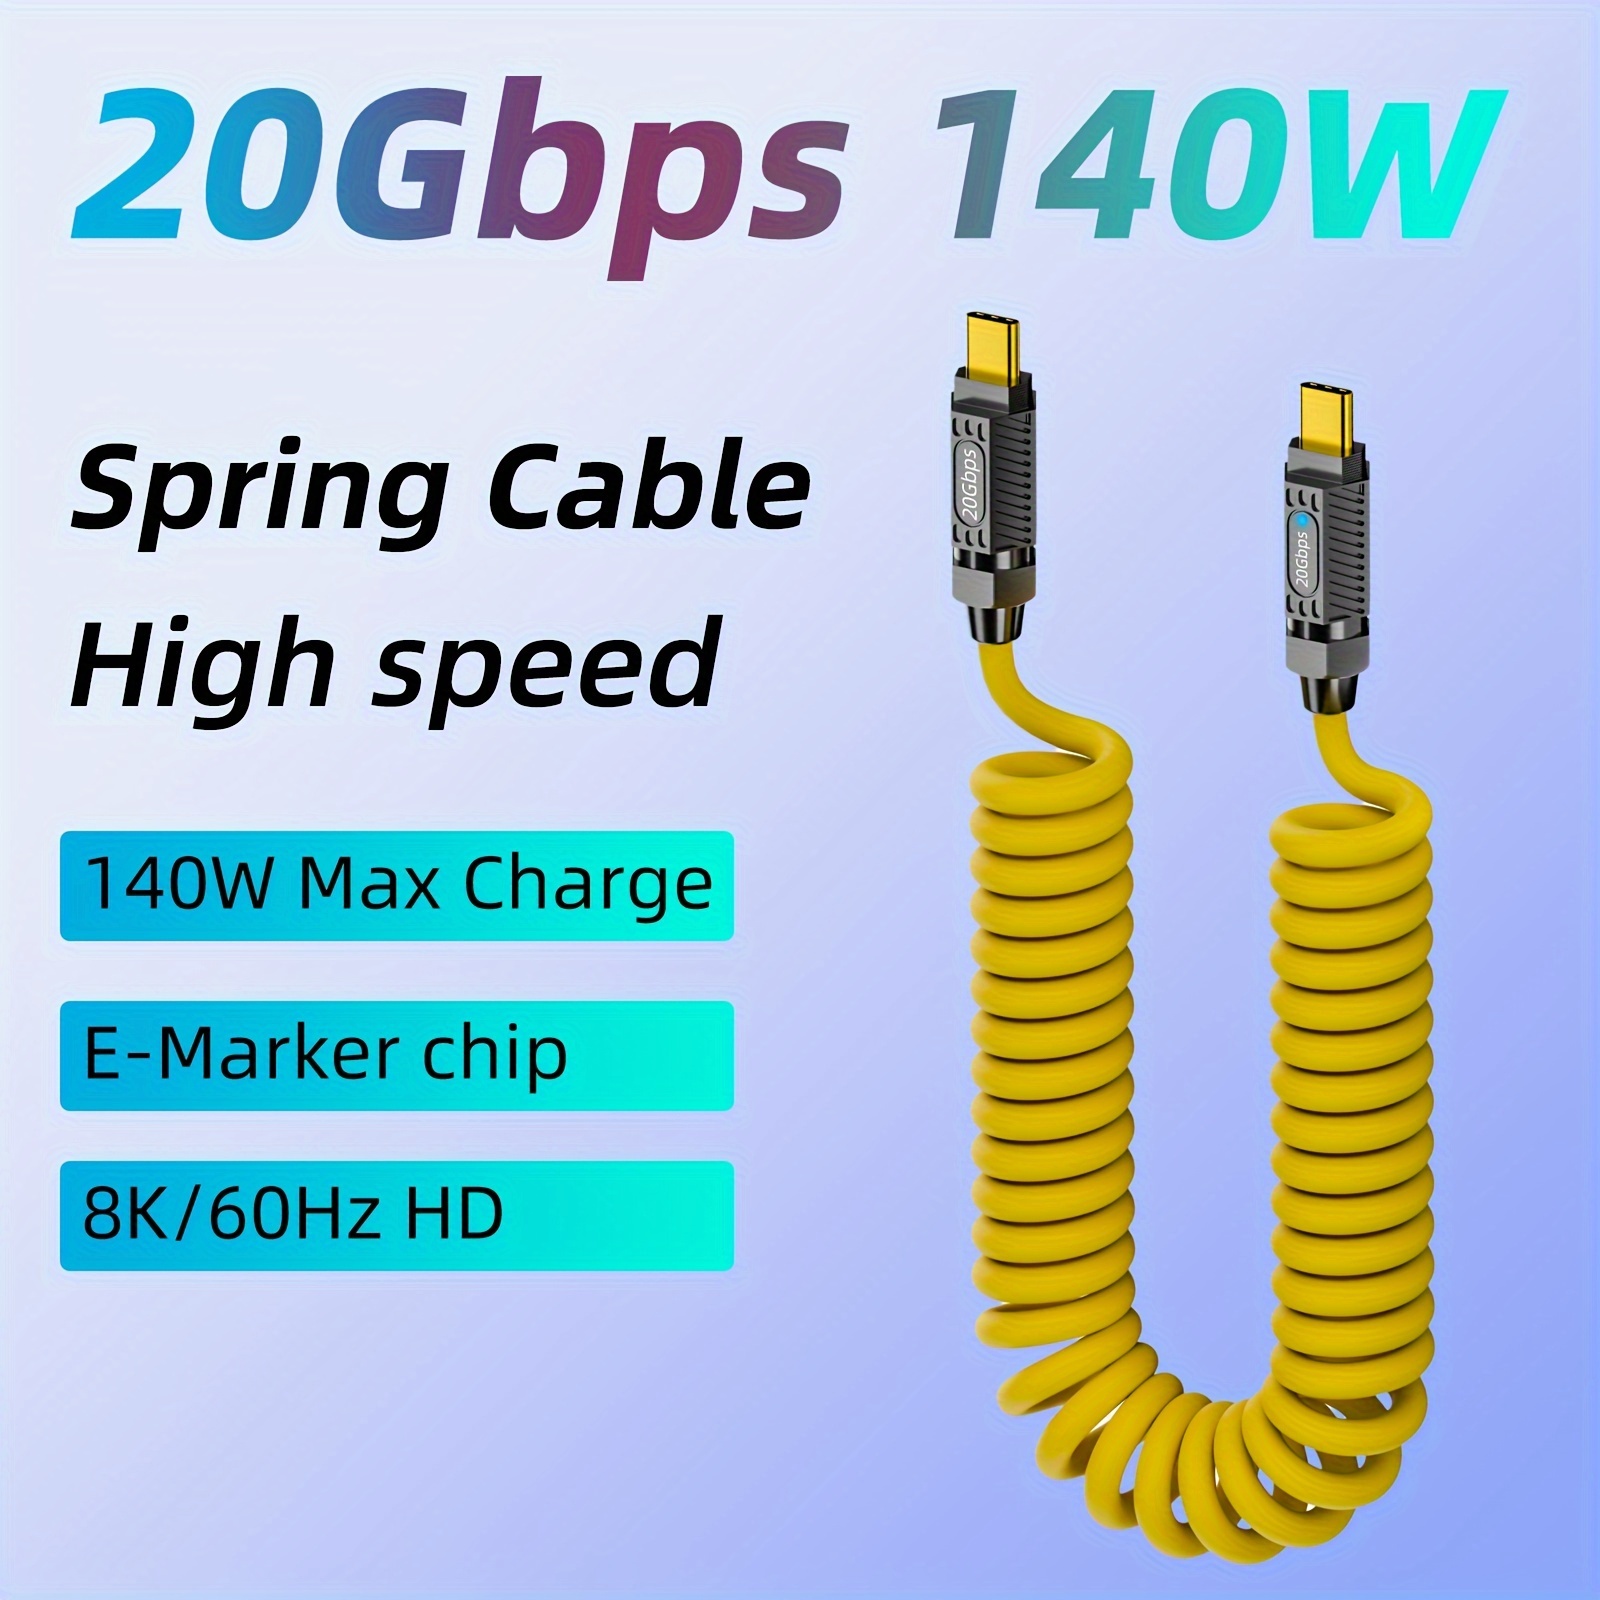 

Spring Data Cable, Usb C To Usb C Cable, 140w Fast Charging, Professional Fast Charging Cable, Support Phones, Tablets, Laptops